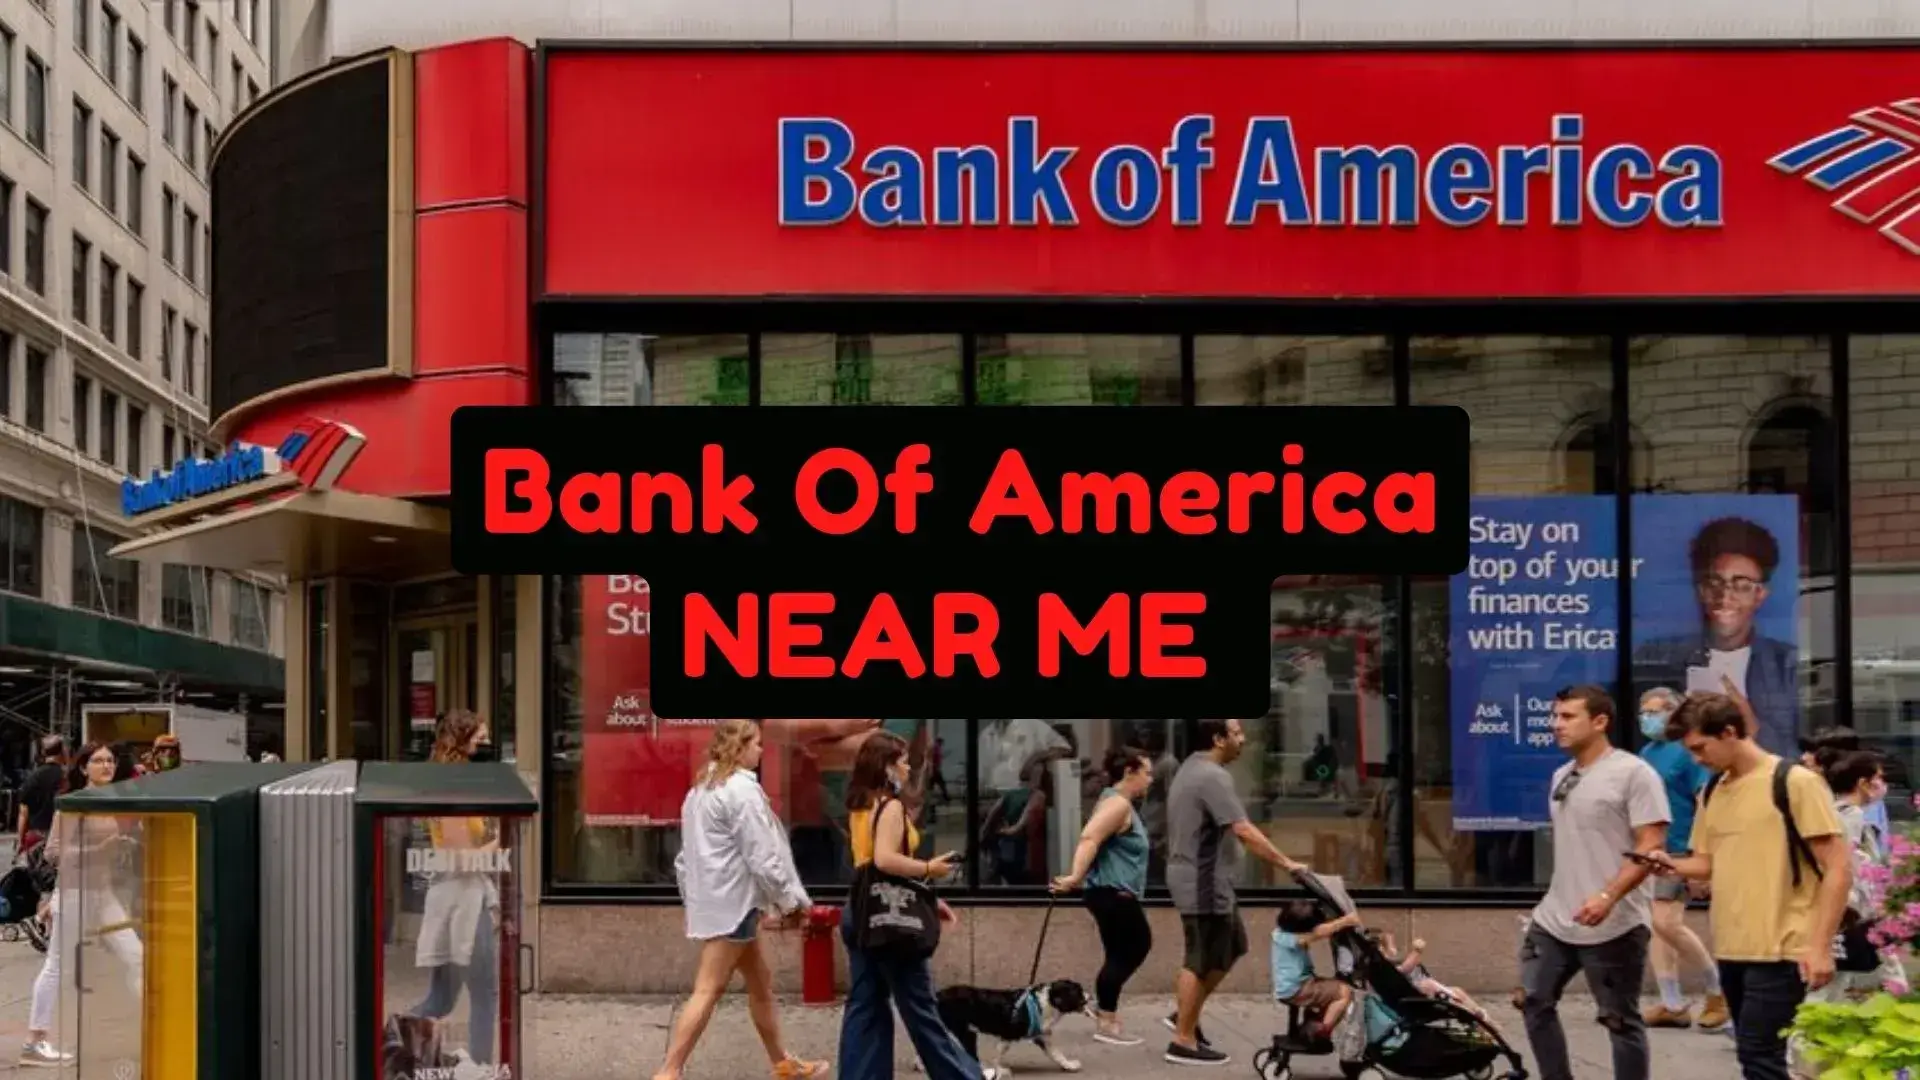 Find the nearest Bank of America branch or ATM location by using our locator. Get directions, view hours, and request an appointment.